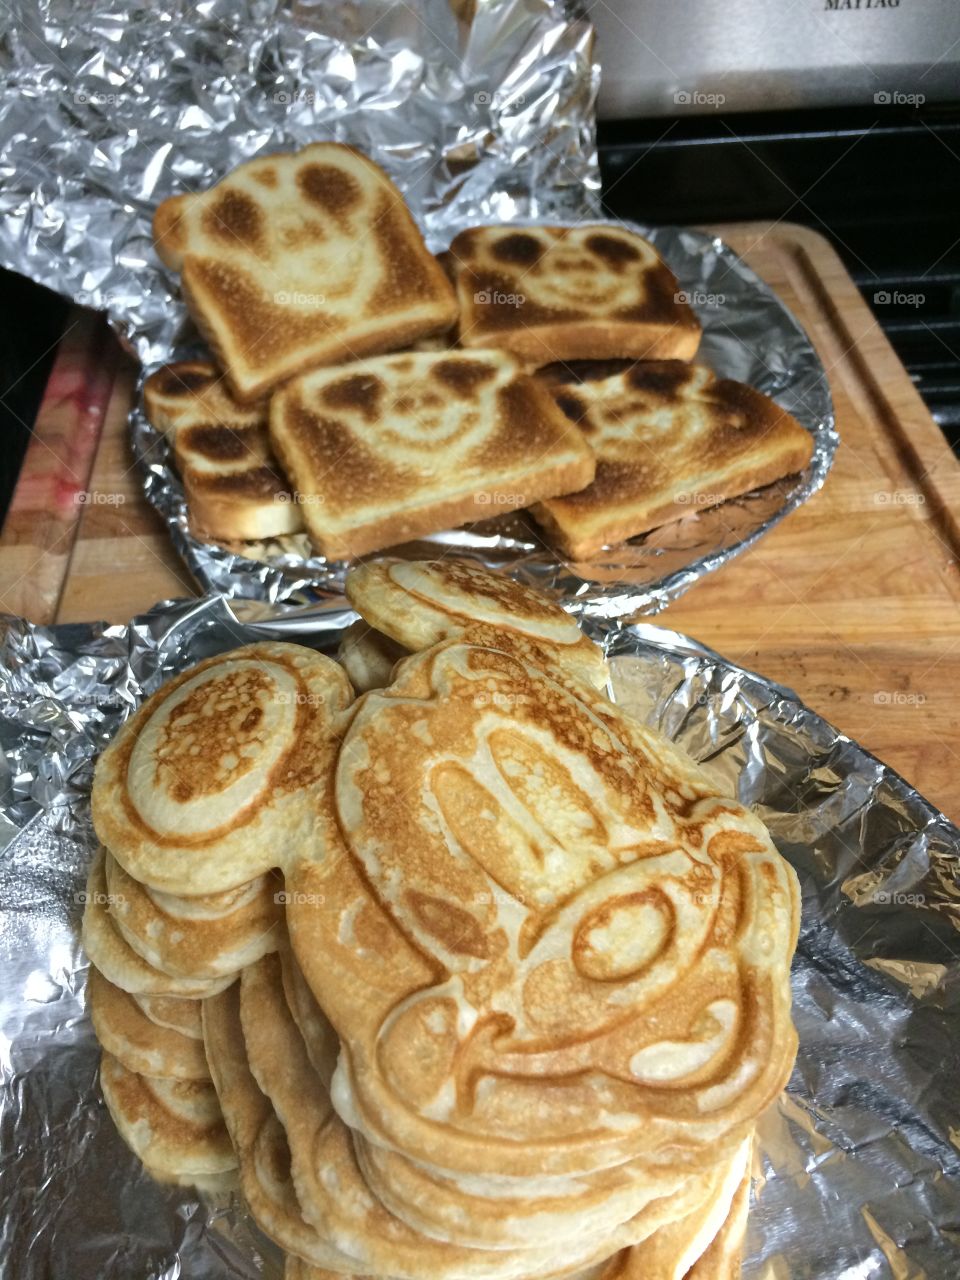 Mickey Mouse pancakes and toast.